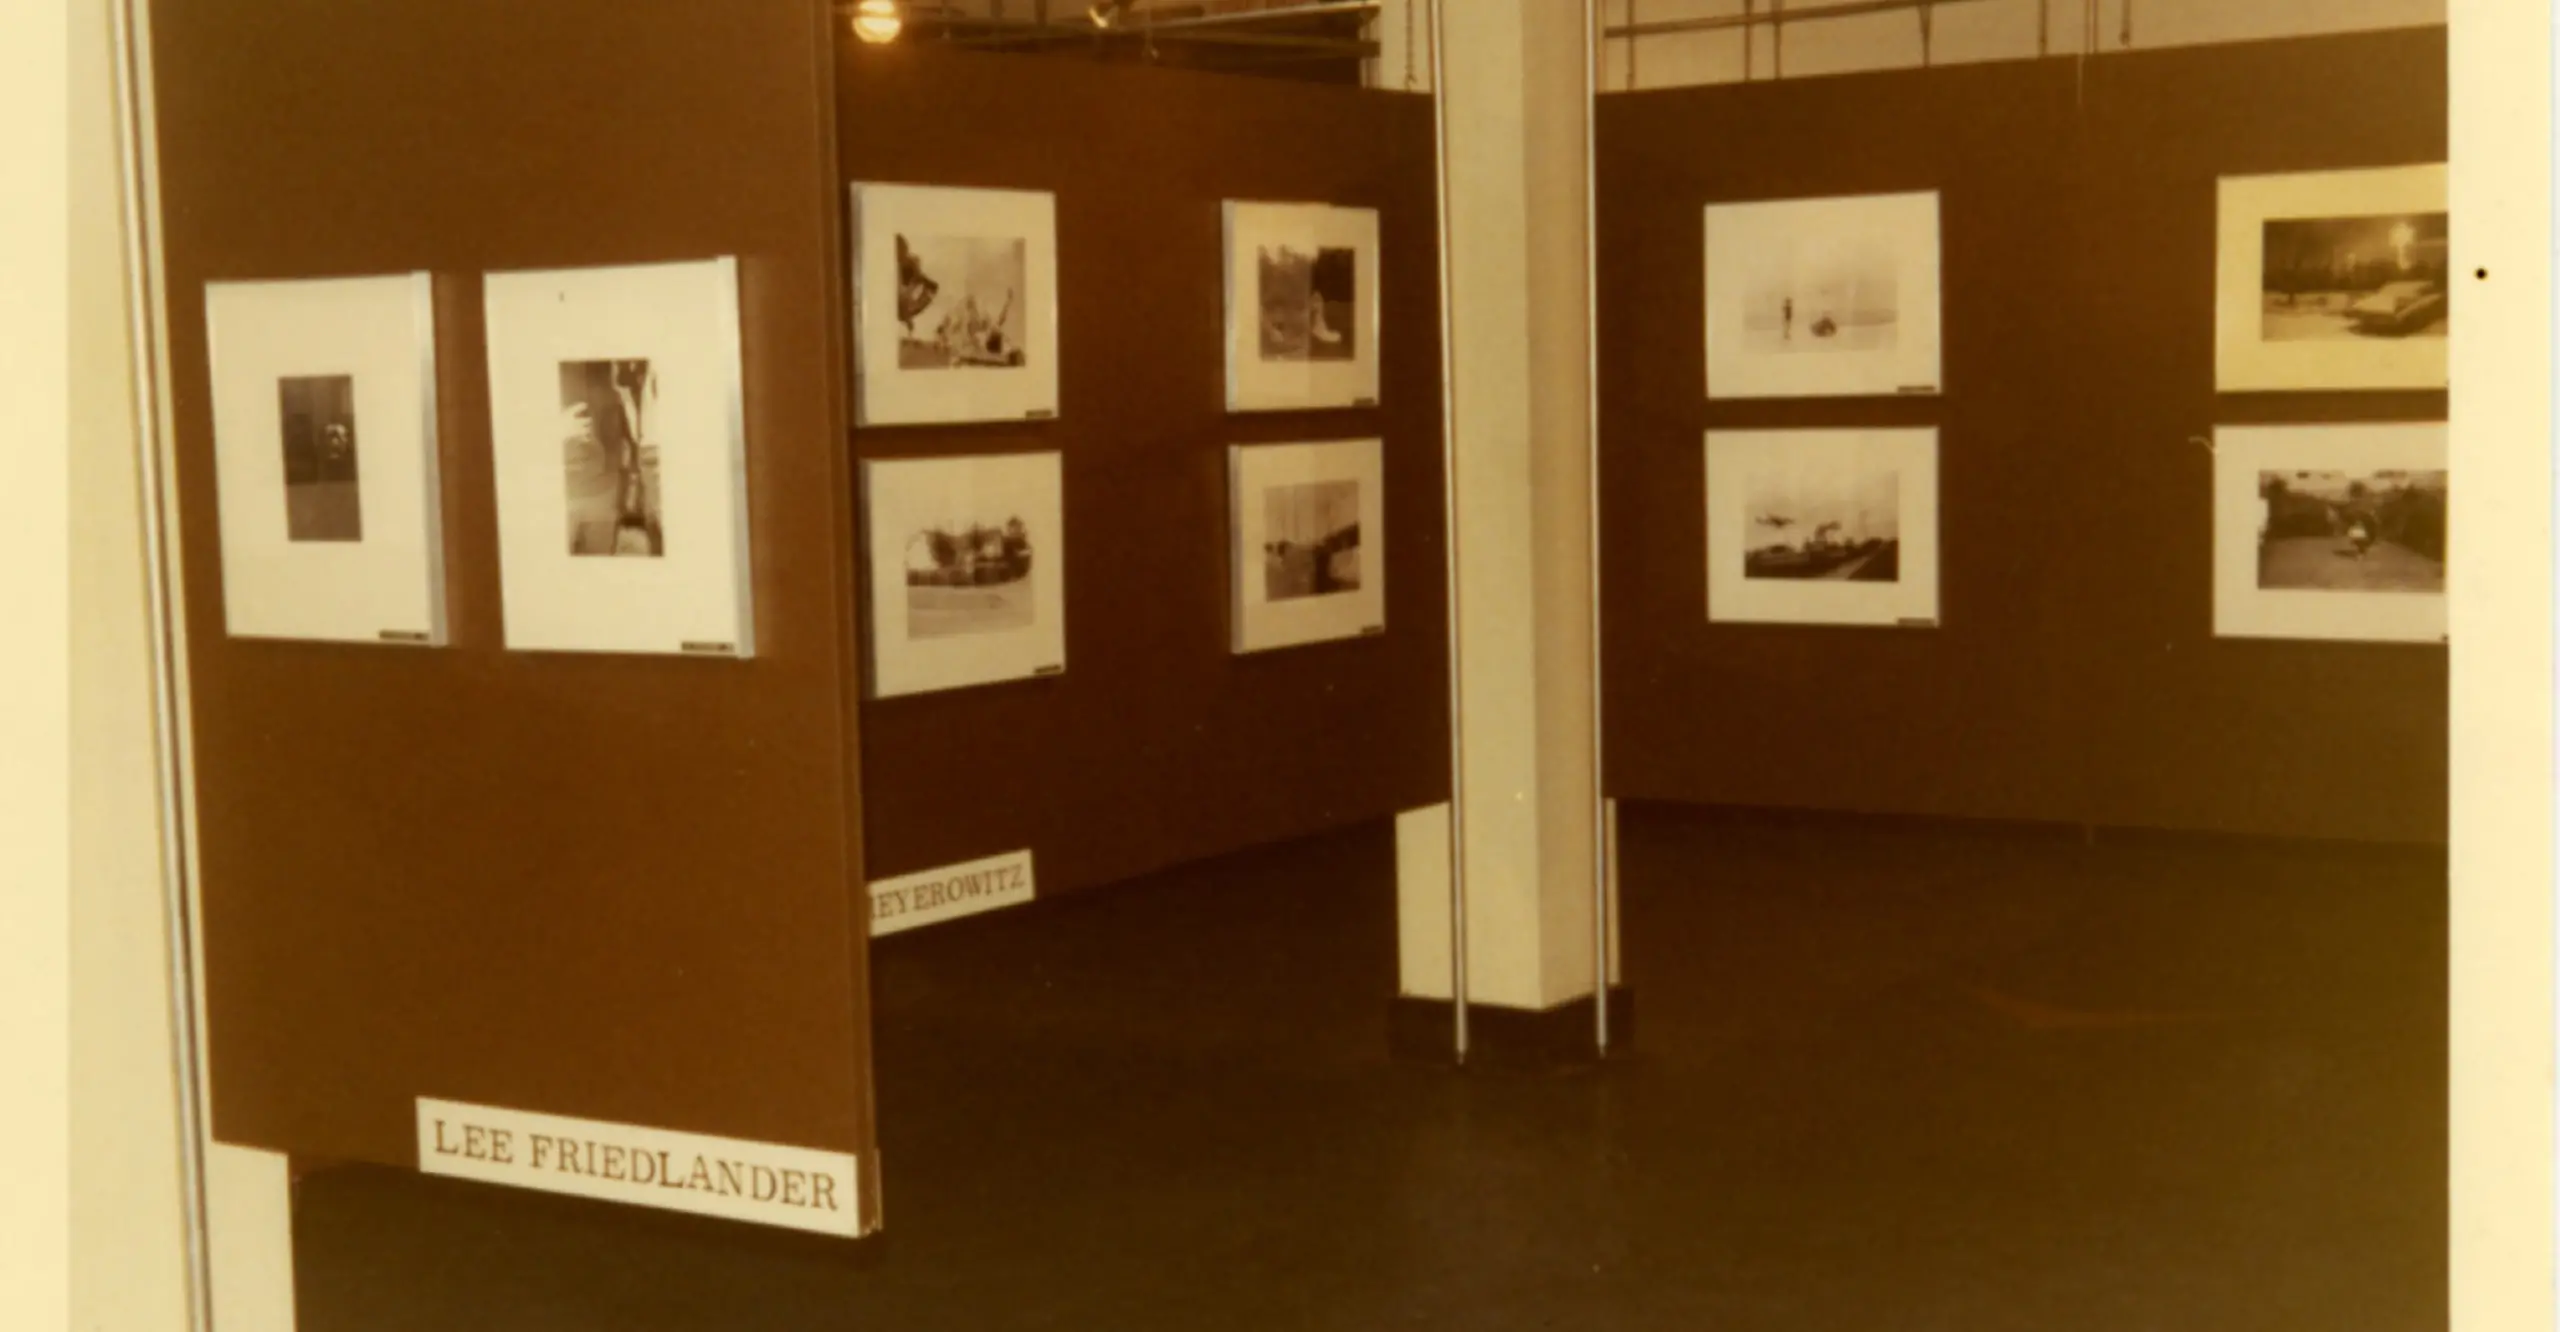 New Photography USA, 1972, installation image. Courtesy The Photographers' Gallery Archive